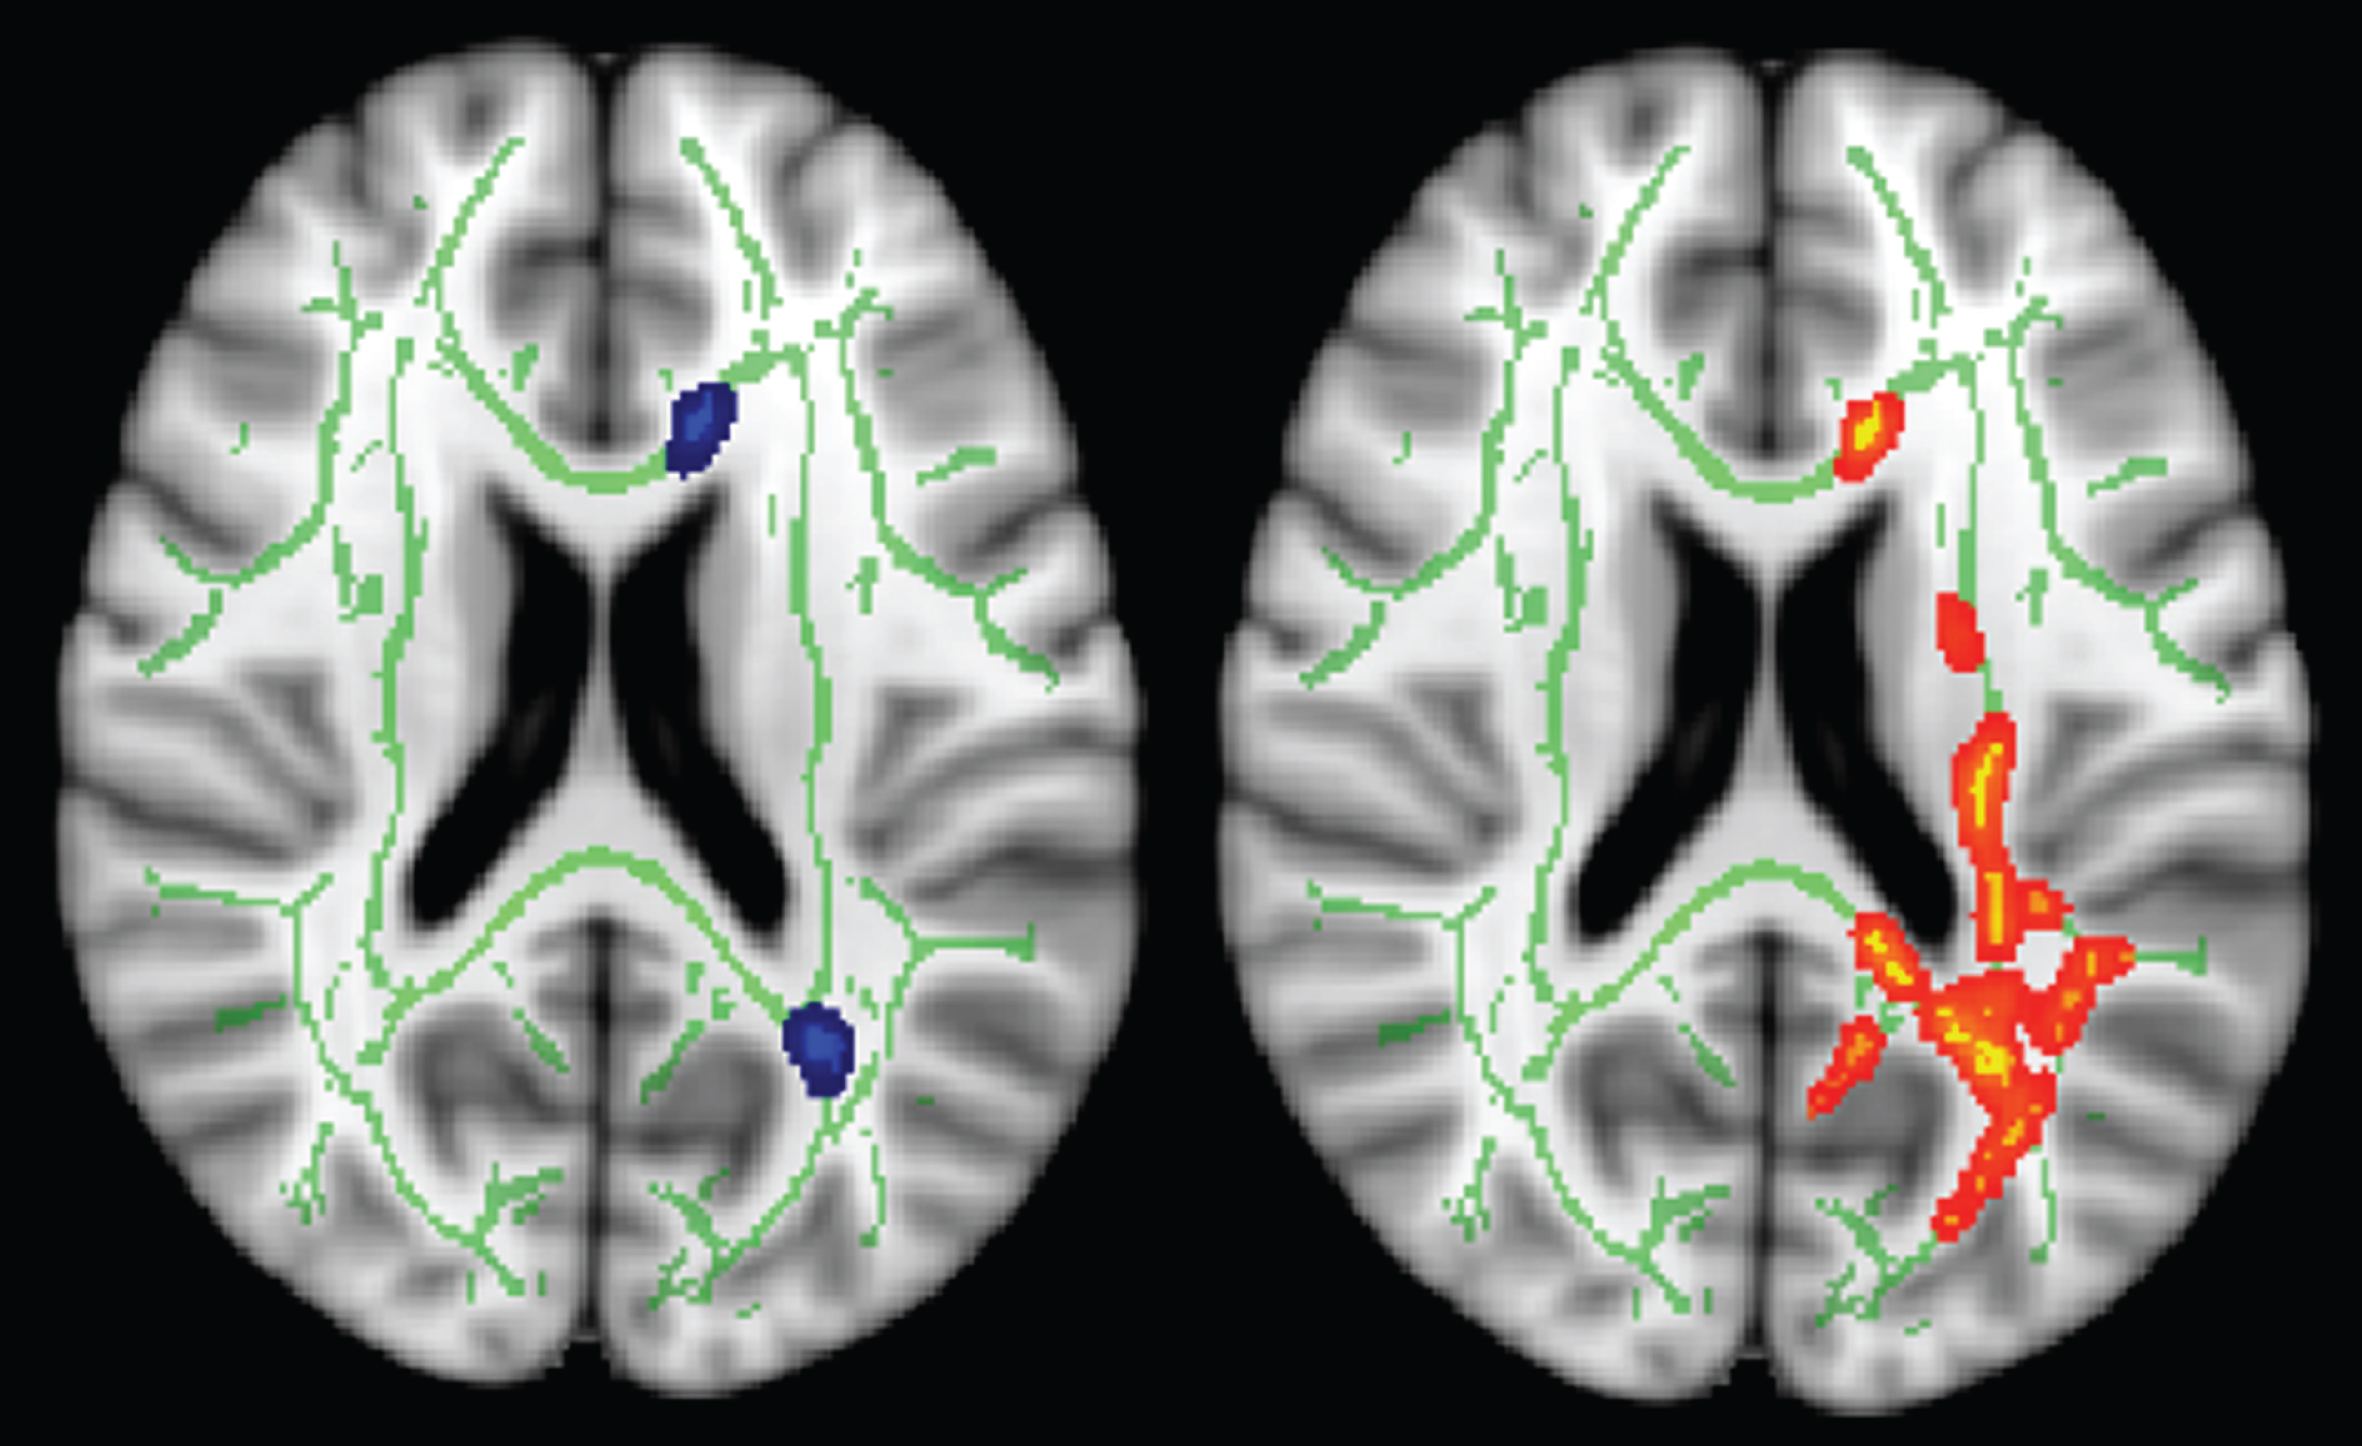 Additional ROI analysis where Fraction anisotropy (FA) values at baseline and follow-up were measured from anterior- and posterior-periventricular regions (left, blue). The red-yellow (right) areas indicate the tracts with significant difference in longitudinal FA changes between control and intervention groups.